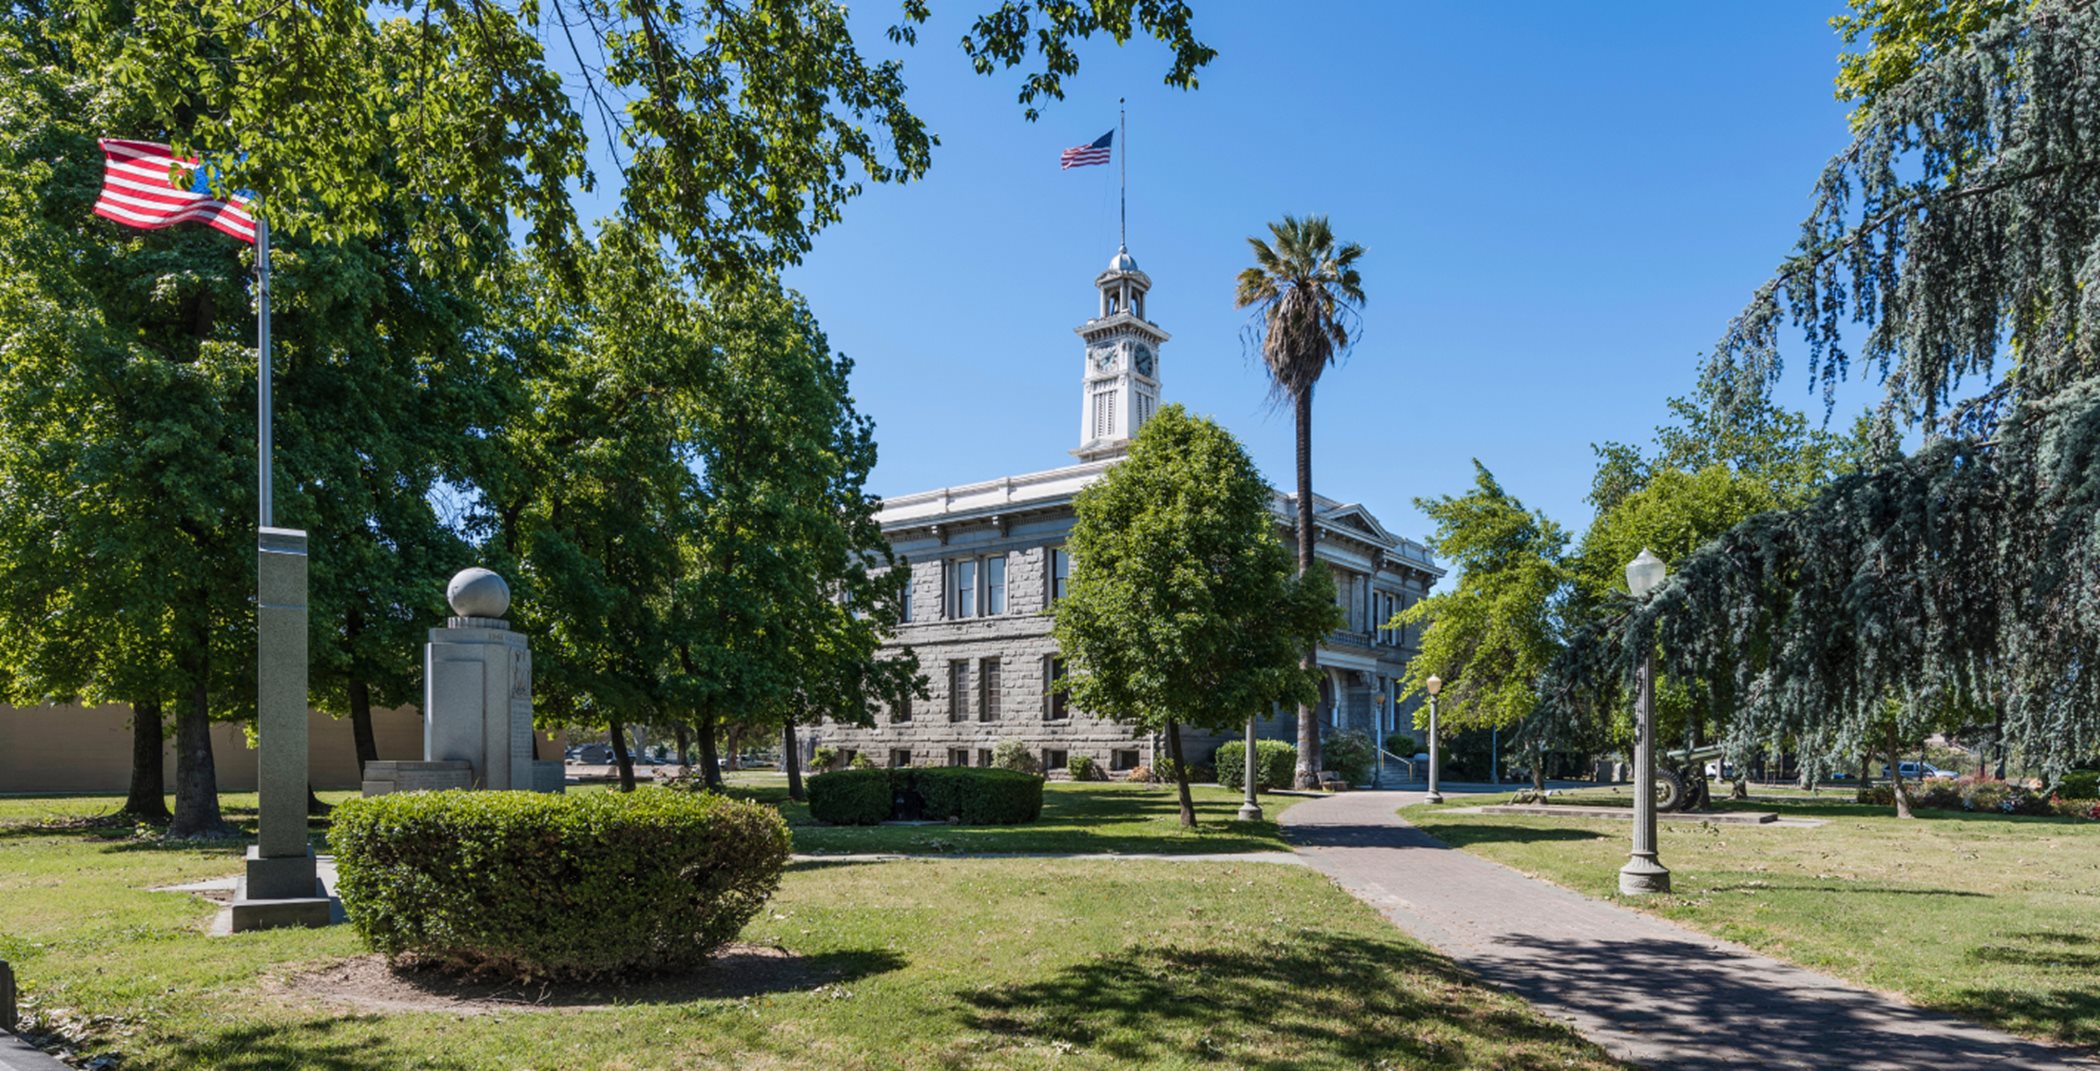 Madera Courthouse lined with greenery